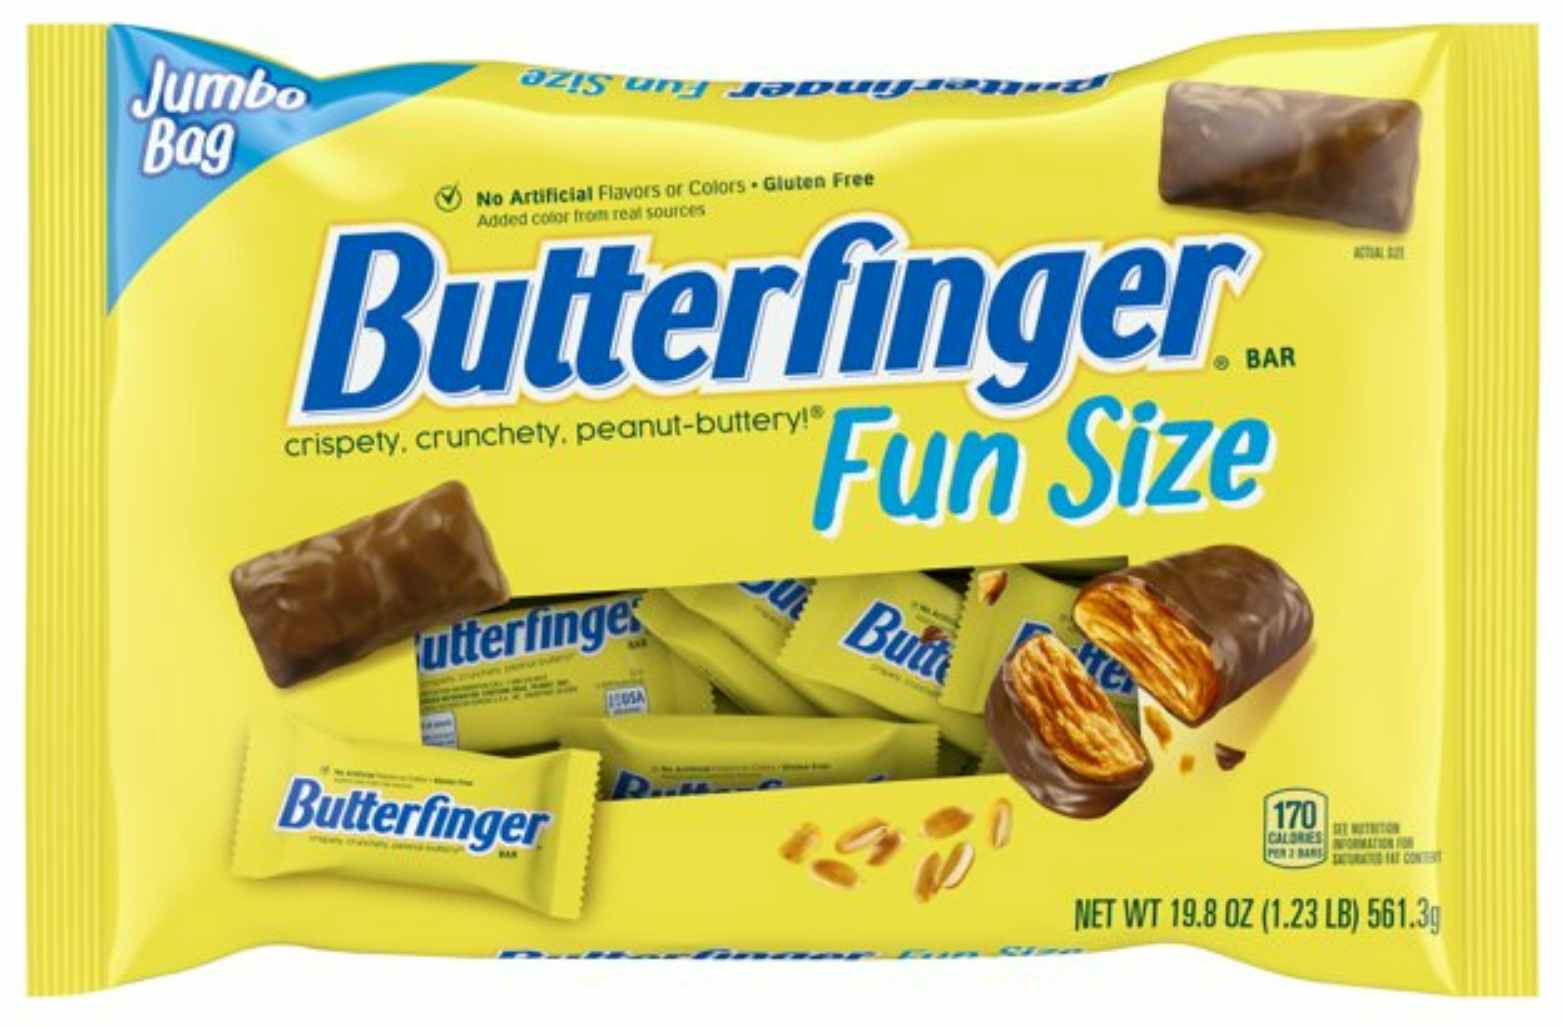 Butterfinger fun size candy bars. 